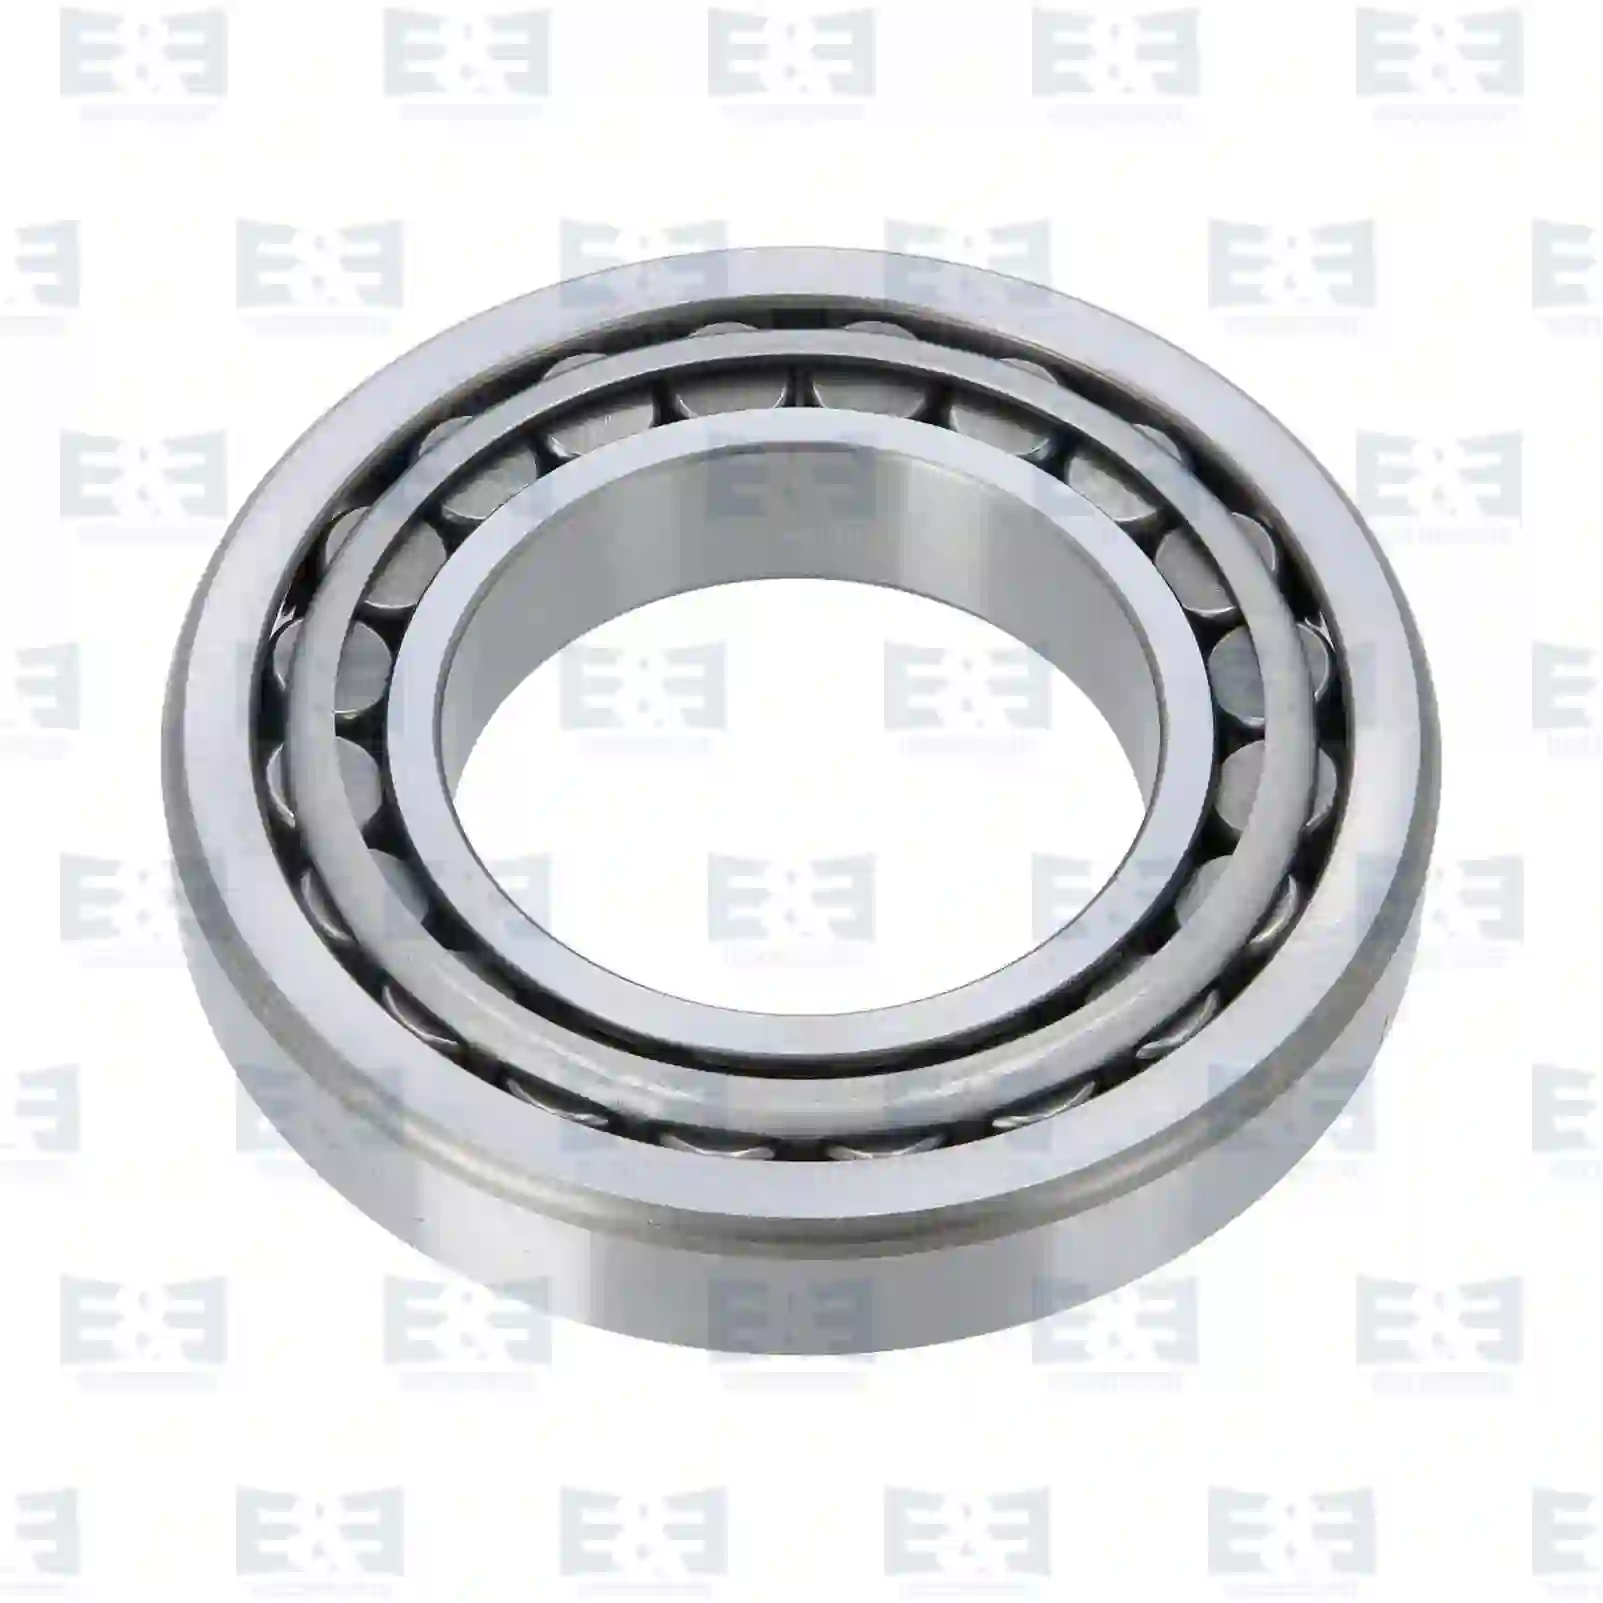 Bearings Tapered roller bearing, EE No 2E2286287 ,  oem no:01102858, 1102858, 26800060, 06324800021, 06324804800, 06324890021, 87523101710, 5000022784, 1102858 E&E Truck Spare Parts | Truck Spare Parts, Auotomotive Spare Parts